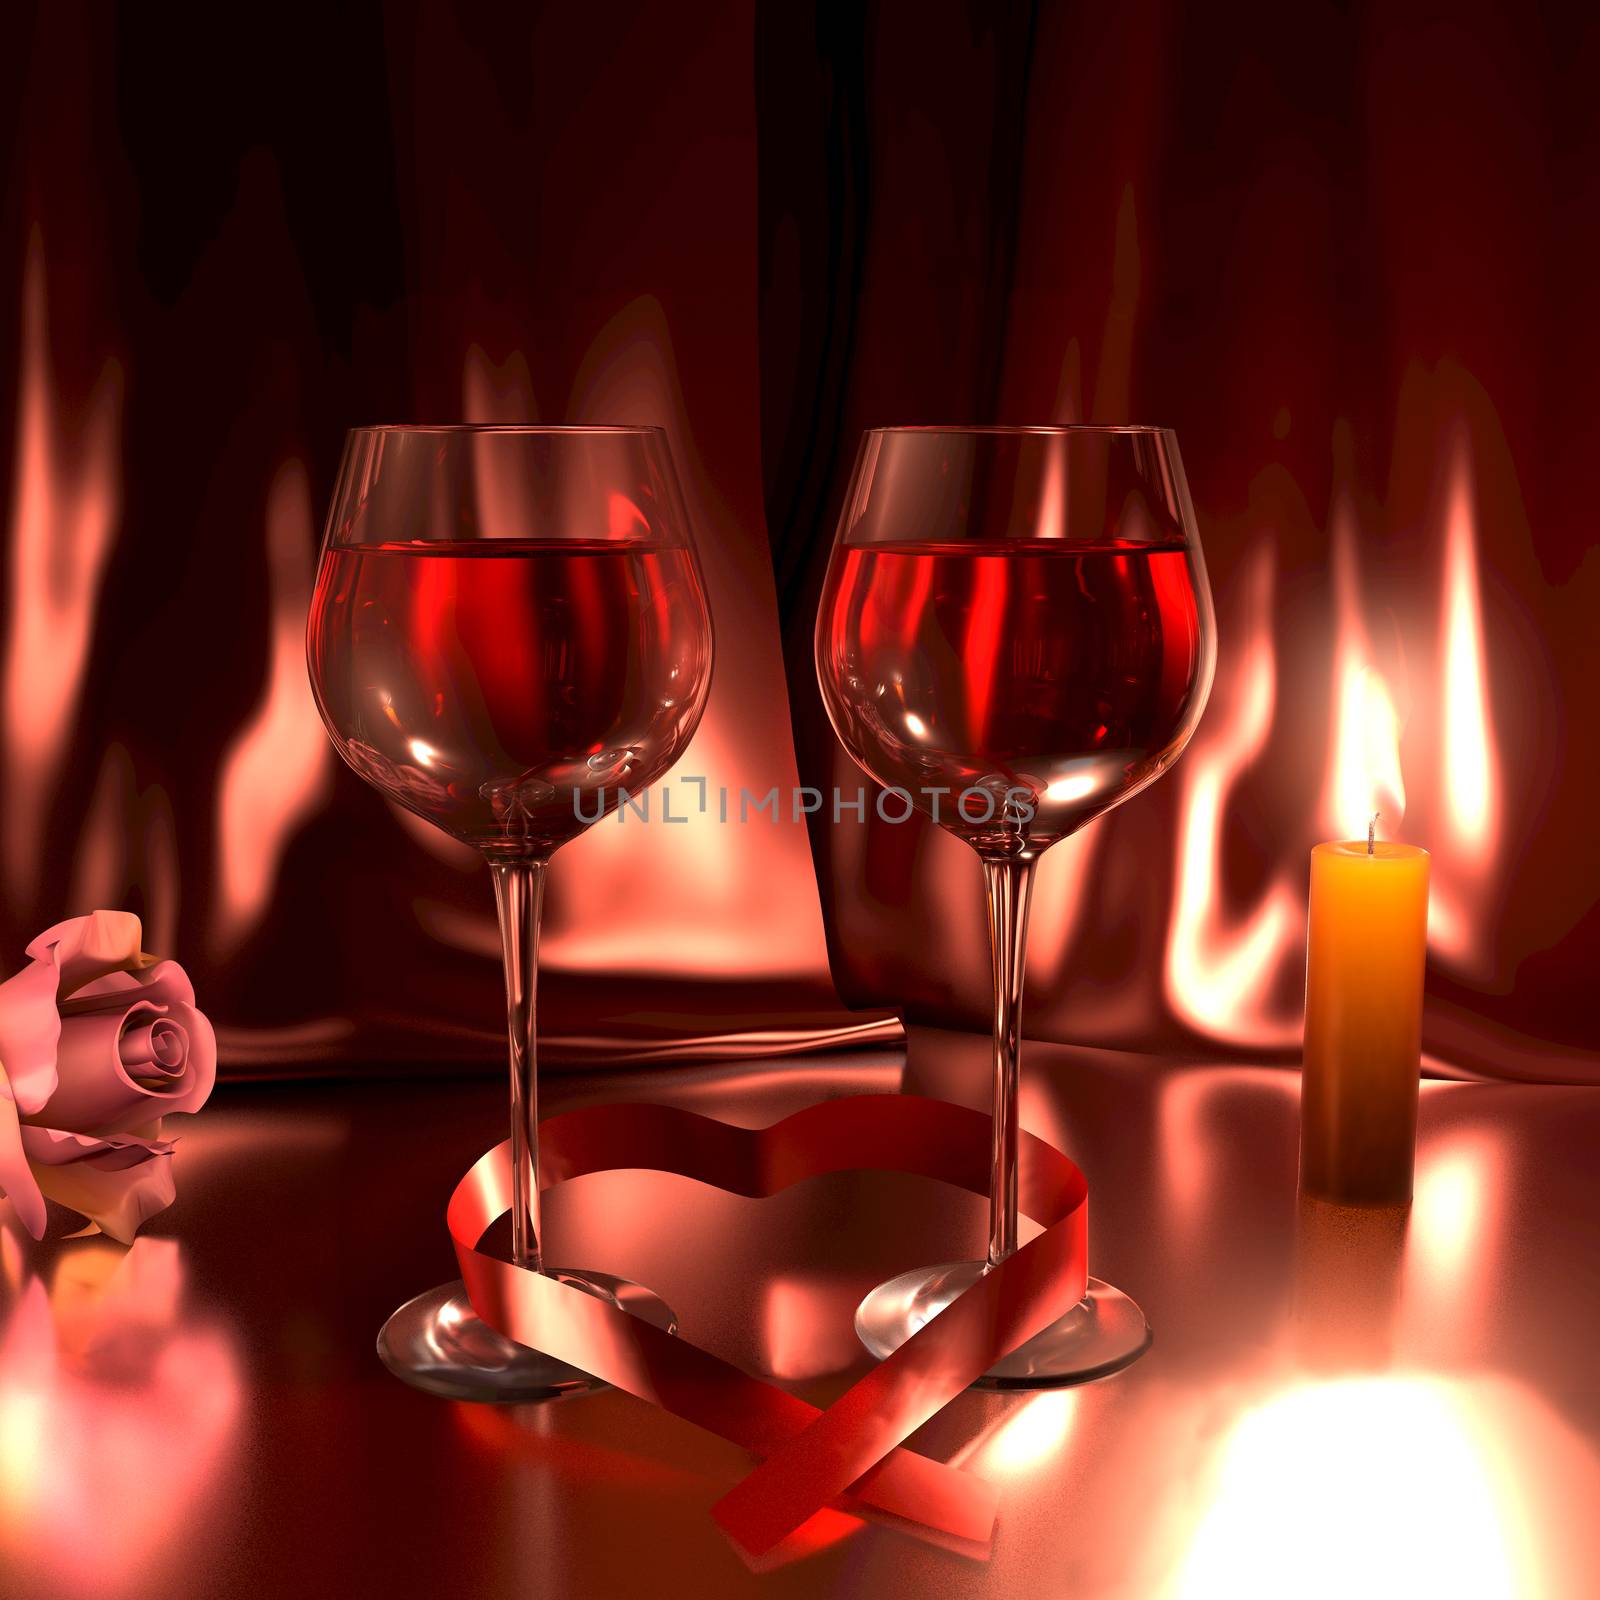 Romantic scene with glasses of good red wine,a rose, lit candle by ytjo